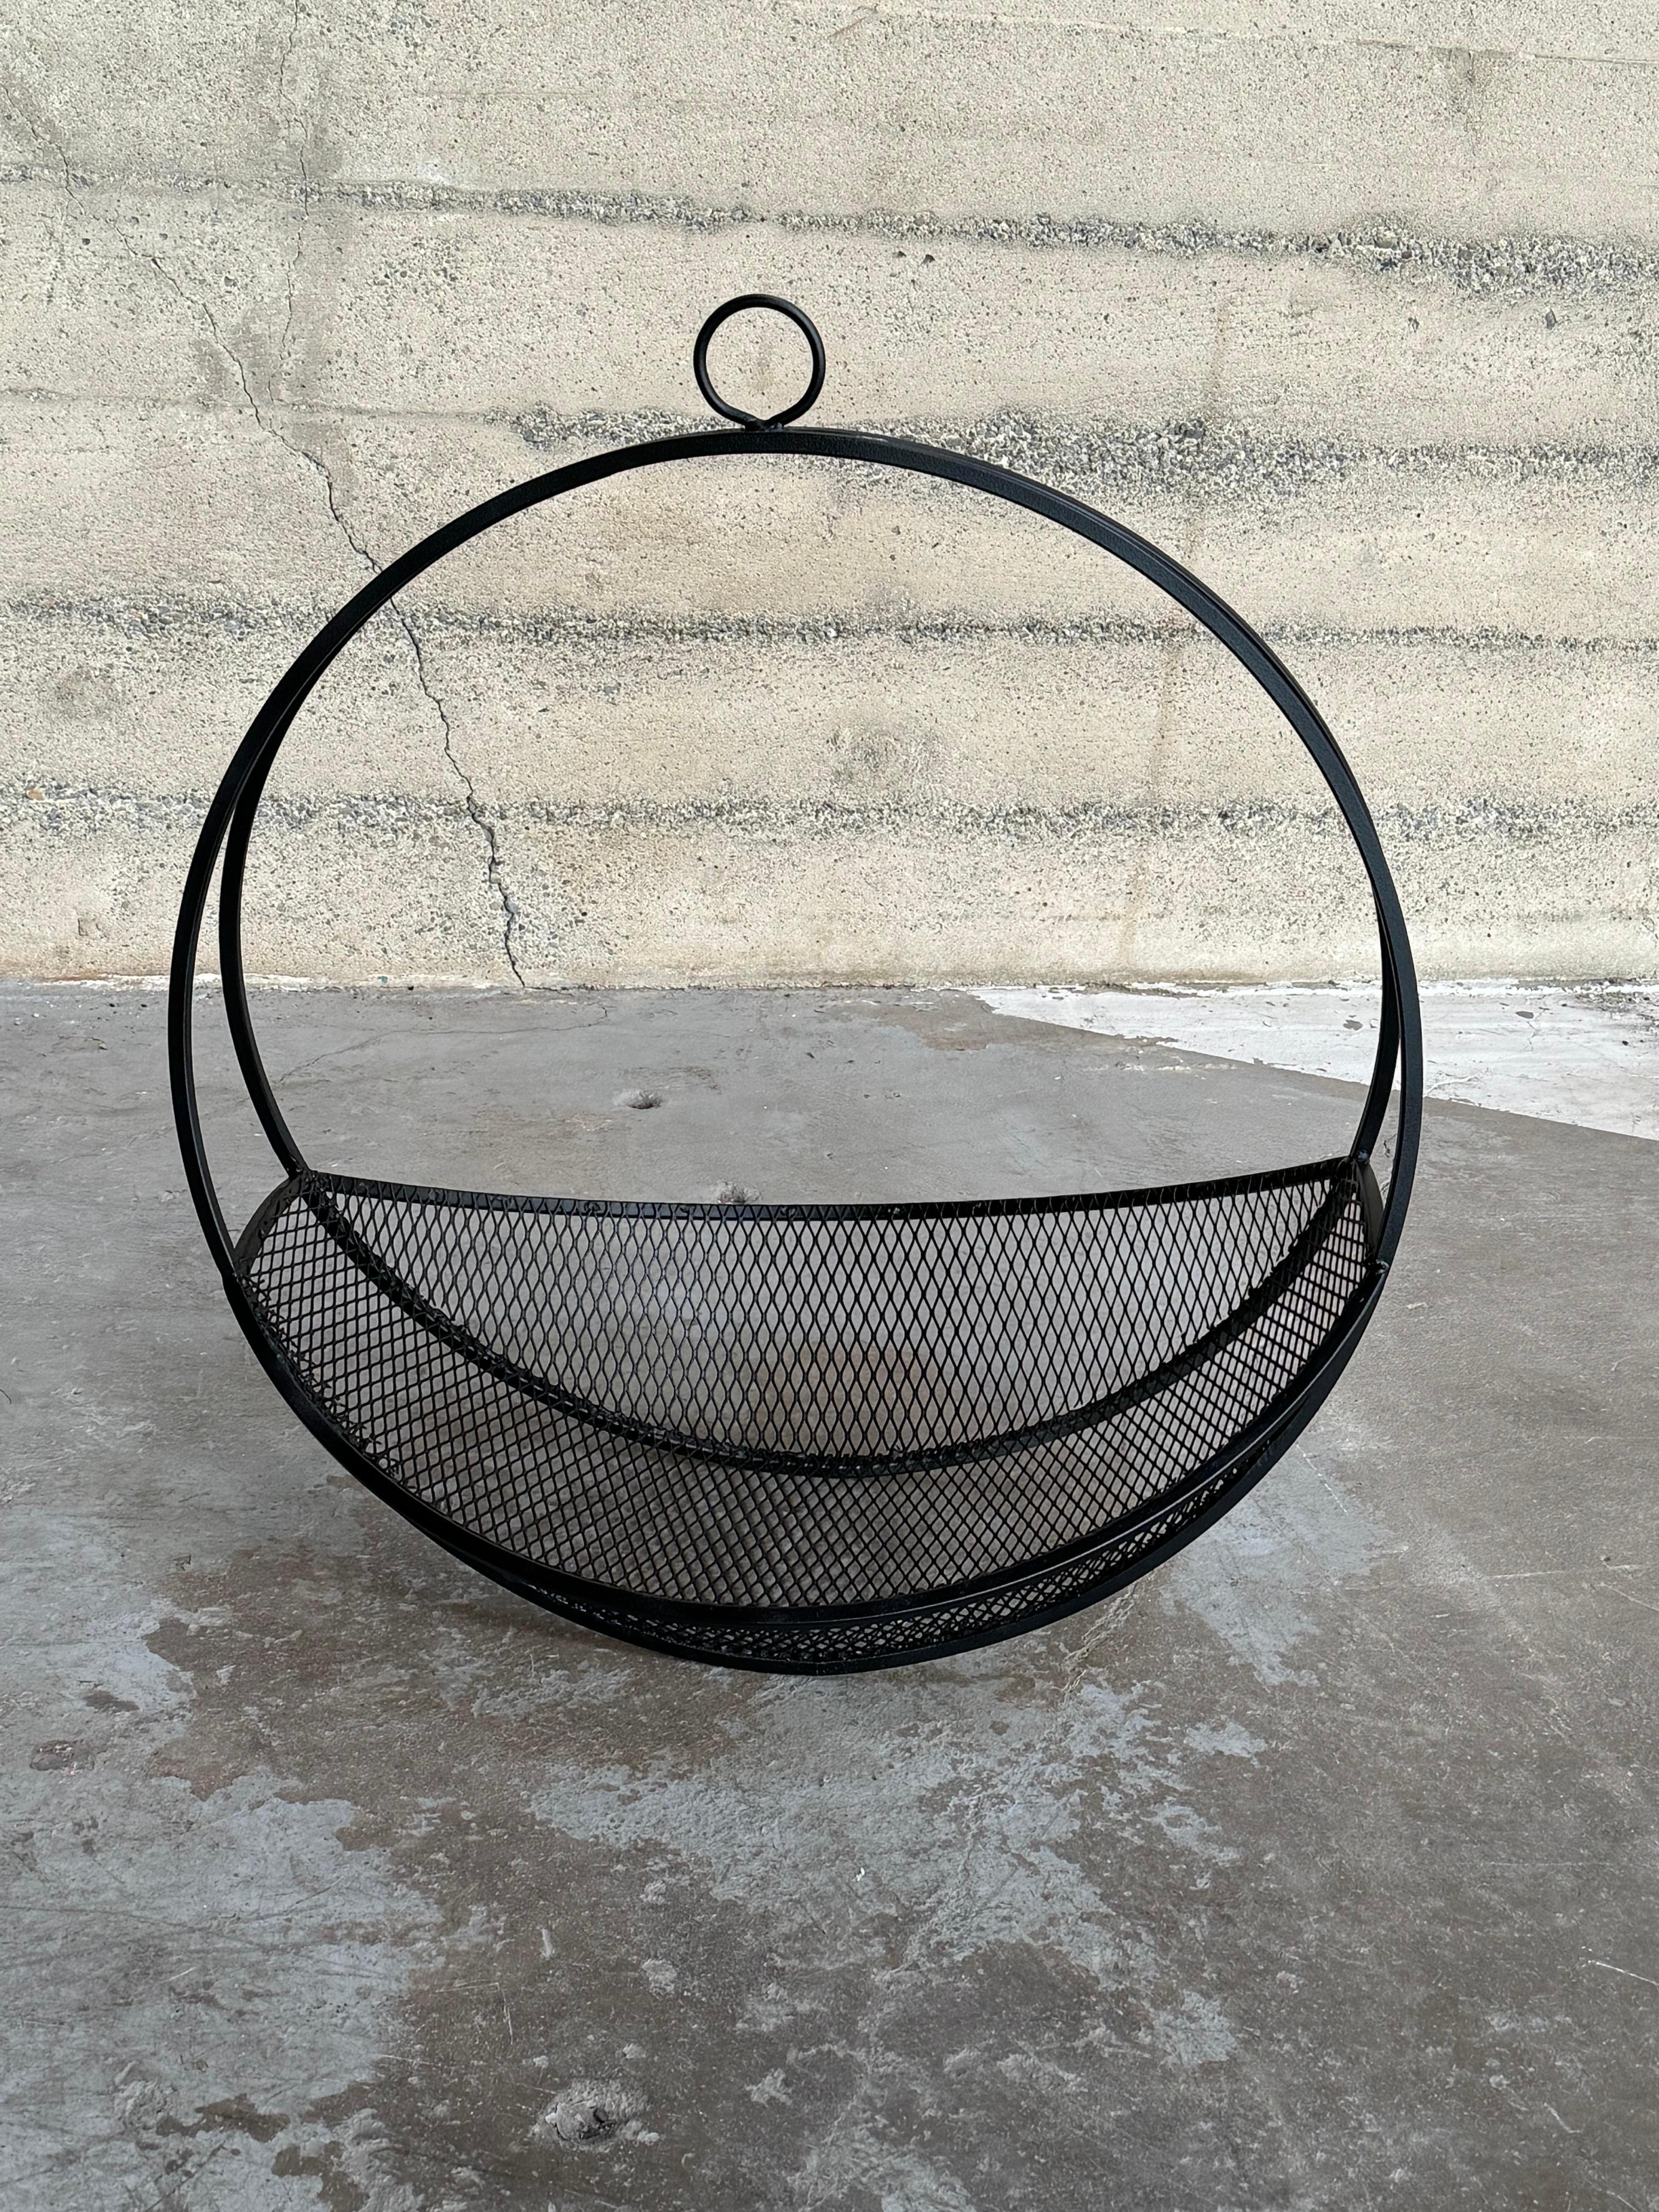 Modernist circa 1950s expanded metal hanging fireplace log holder. The circular shape is created by two squared metal rods with a circular ring welded at the top for hanging and the basket is constructed of an expanded metal mesh tapered at both